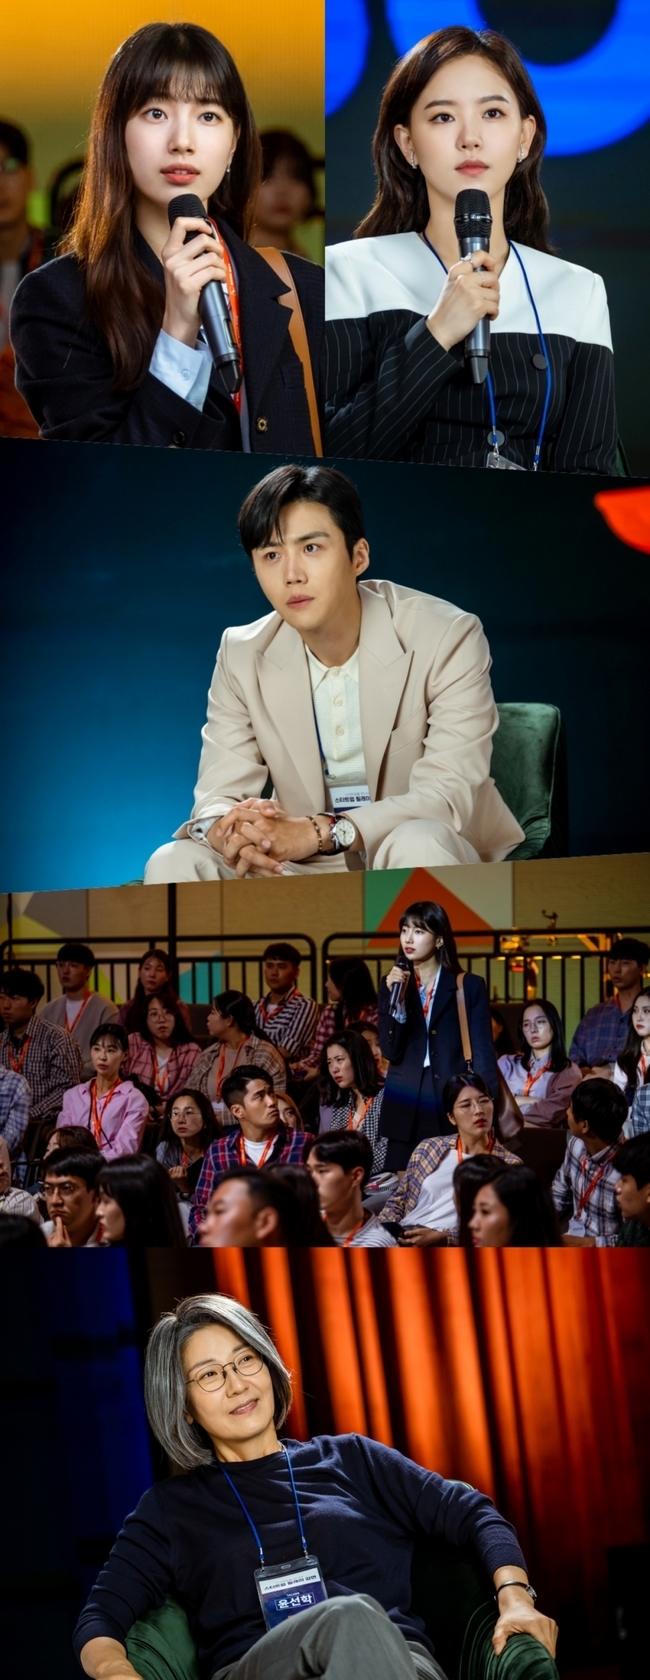 StartUp Bae Suzy, Kang Han-Na launches sparkling nerve battleTVNs new Saturday, which will be broadcasted on October 17, will be released on the scene where the strange confrontation between Seo Dal-mi (Bae Suzy) and Won In-jae (Kang Han-Na) is felt by TVNs new Saturday, StartUp (directed by Oh Chung-hwan/playplayplayplayplayplay by Park Hye-ryun/planning studio Dragon/production high story).In the drama, Seo Dal-mi and Won Jae-jae were living a different life of fate after following their father and mother with their parents divorce in childhood.As a result, Seo Dal-mi is currently on the opposite path of life as an elite CEO with her sister, Won Jae-jae, on her back with her chaebol stepfather as a fixed-term employment contract, which is going straight for her dreams.In the public photos, Seo Dal-mi and Won Jae, who lived without such contact points, face each other and catch their attention.Especially, Seo Dal-mi, who is standing as an audience member, Won Jae, who is being asked on stage, and the opposite situation of the two CEOs, are clearly revealed and more curious.Above all, the air flow between Seo Dal-mi and Won-jae is so unusual that tension is heightened. The gap between the sisters who once lived in a family but lived in another time is tense.Another speaker watching this, Han Ji-pyeong (Kim Sun-ho), the head of SH Venture Capital, and Yoon Sun-hak (Seo Lee-sook), the CEO of SH Venture Capital and founder of Sandbox, are also filled with interesting questions about them.